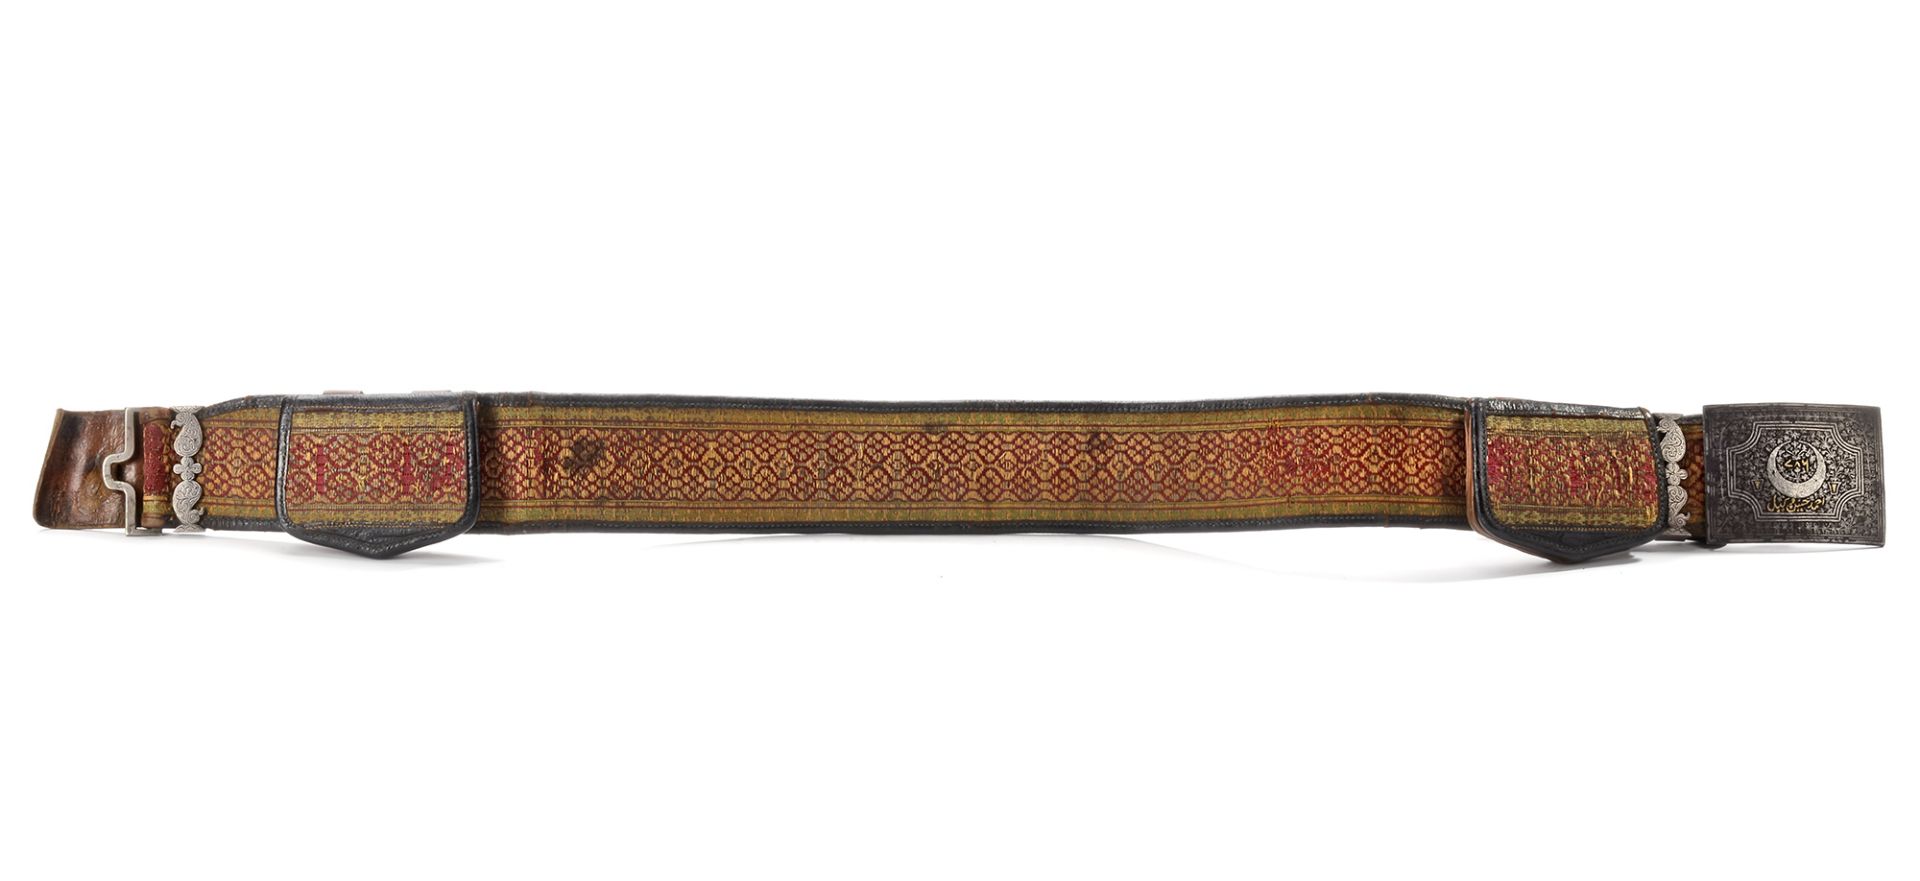 IHRAM BELT, LEATHER, SILK AND LINEN WITH METAL BUCKLE, 19TH CENTURY - Image 3 of 3